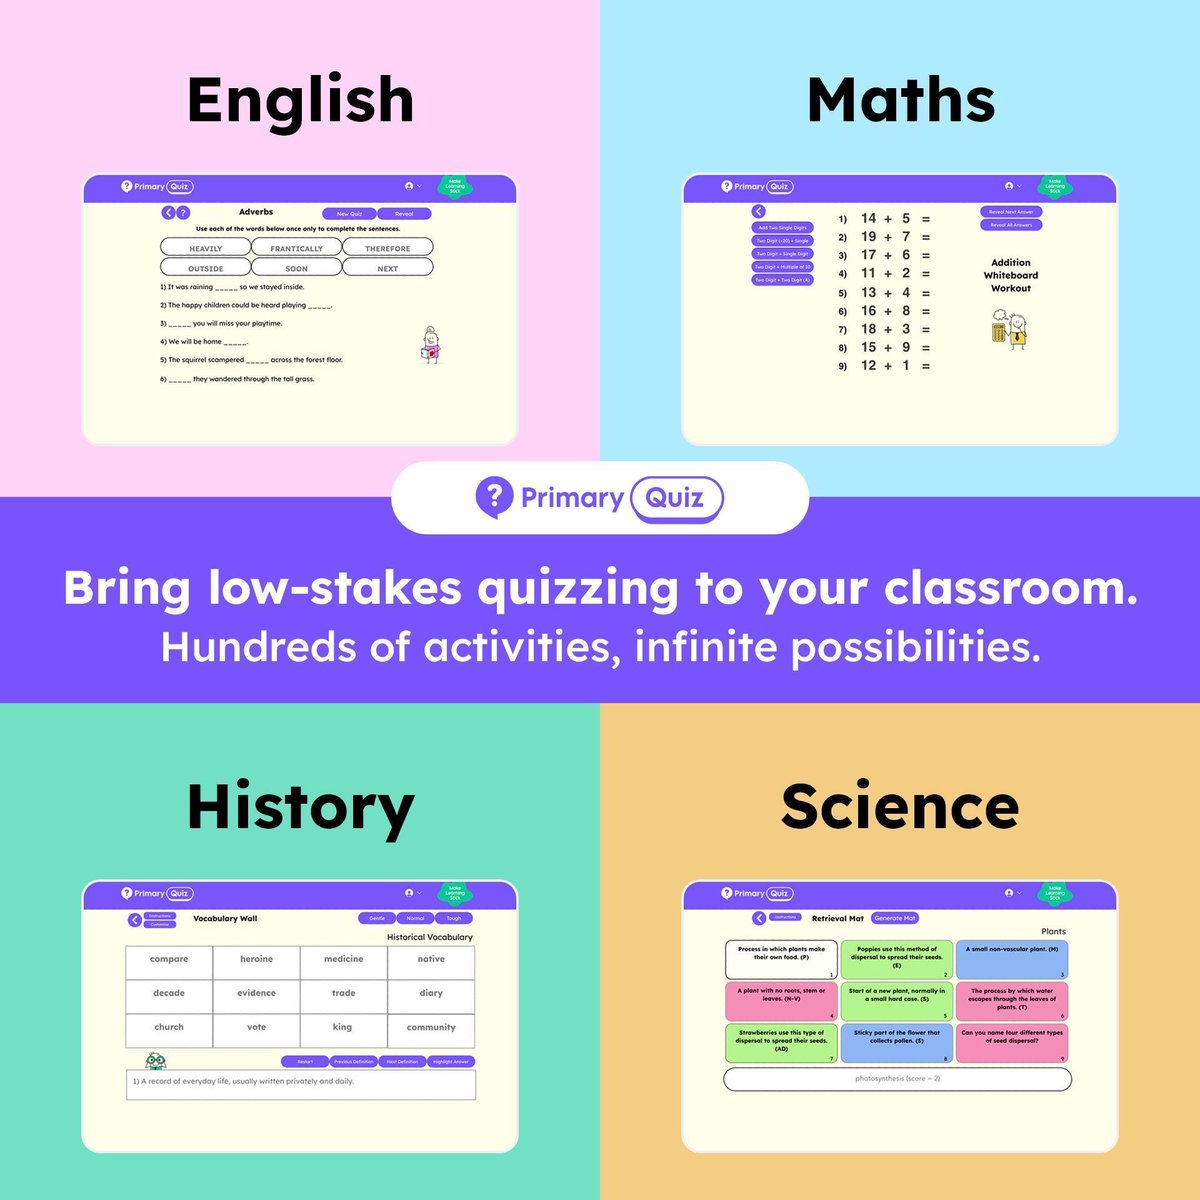 Make Learning Stick with @PrimaryQuiz!

Puzzles, problems, games and quizzes to engage your pupils and make learning stick.

Try for our free on our website to learn more: buff.ly/45xXaIi 

#Education #Maths #English #History #Science #Classroom #PrimarySchools